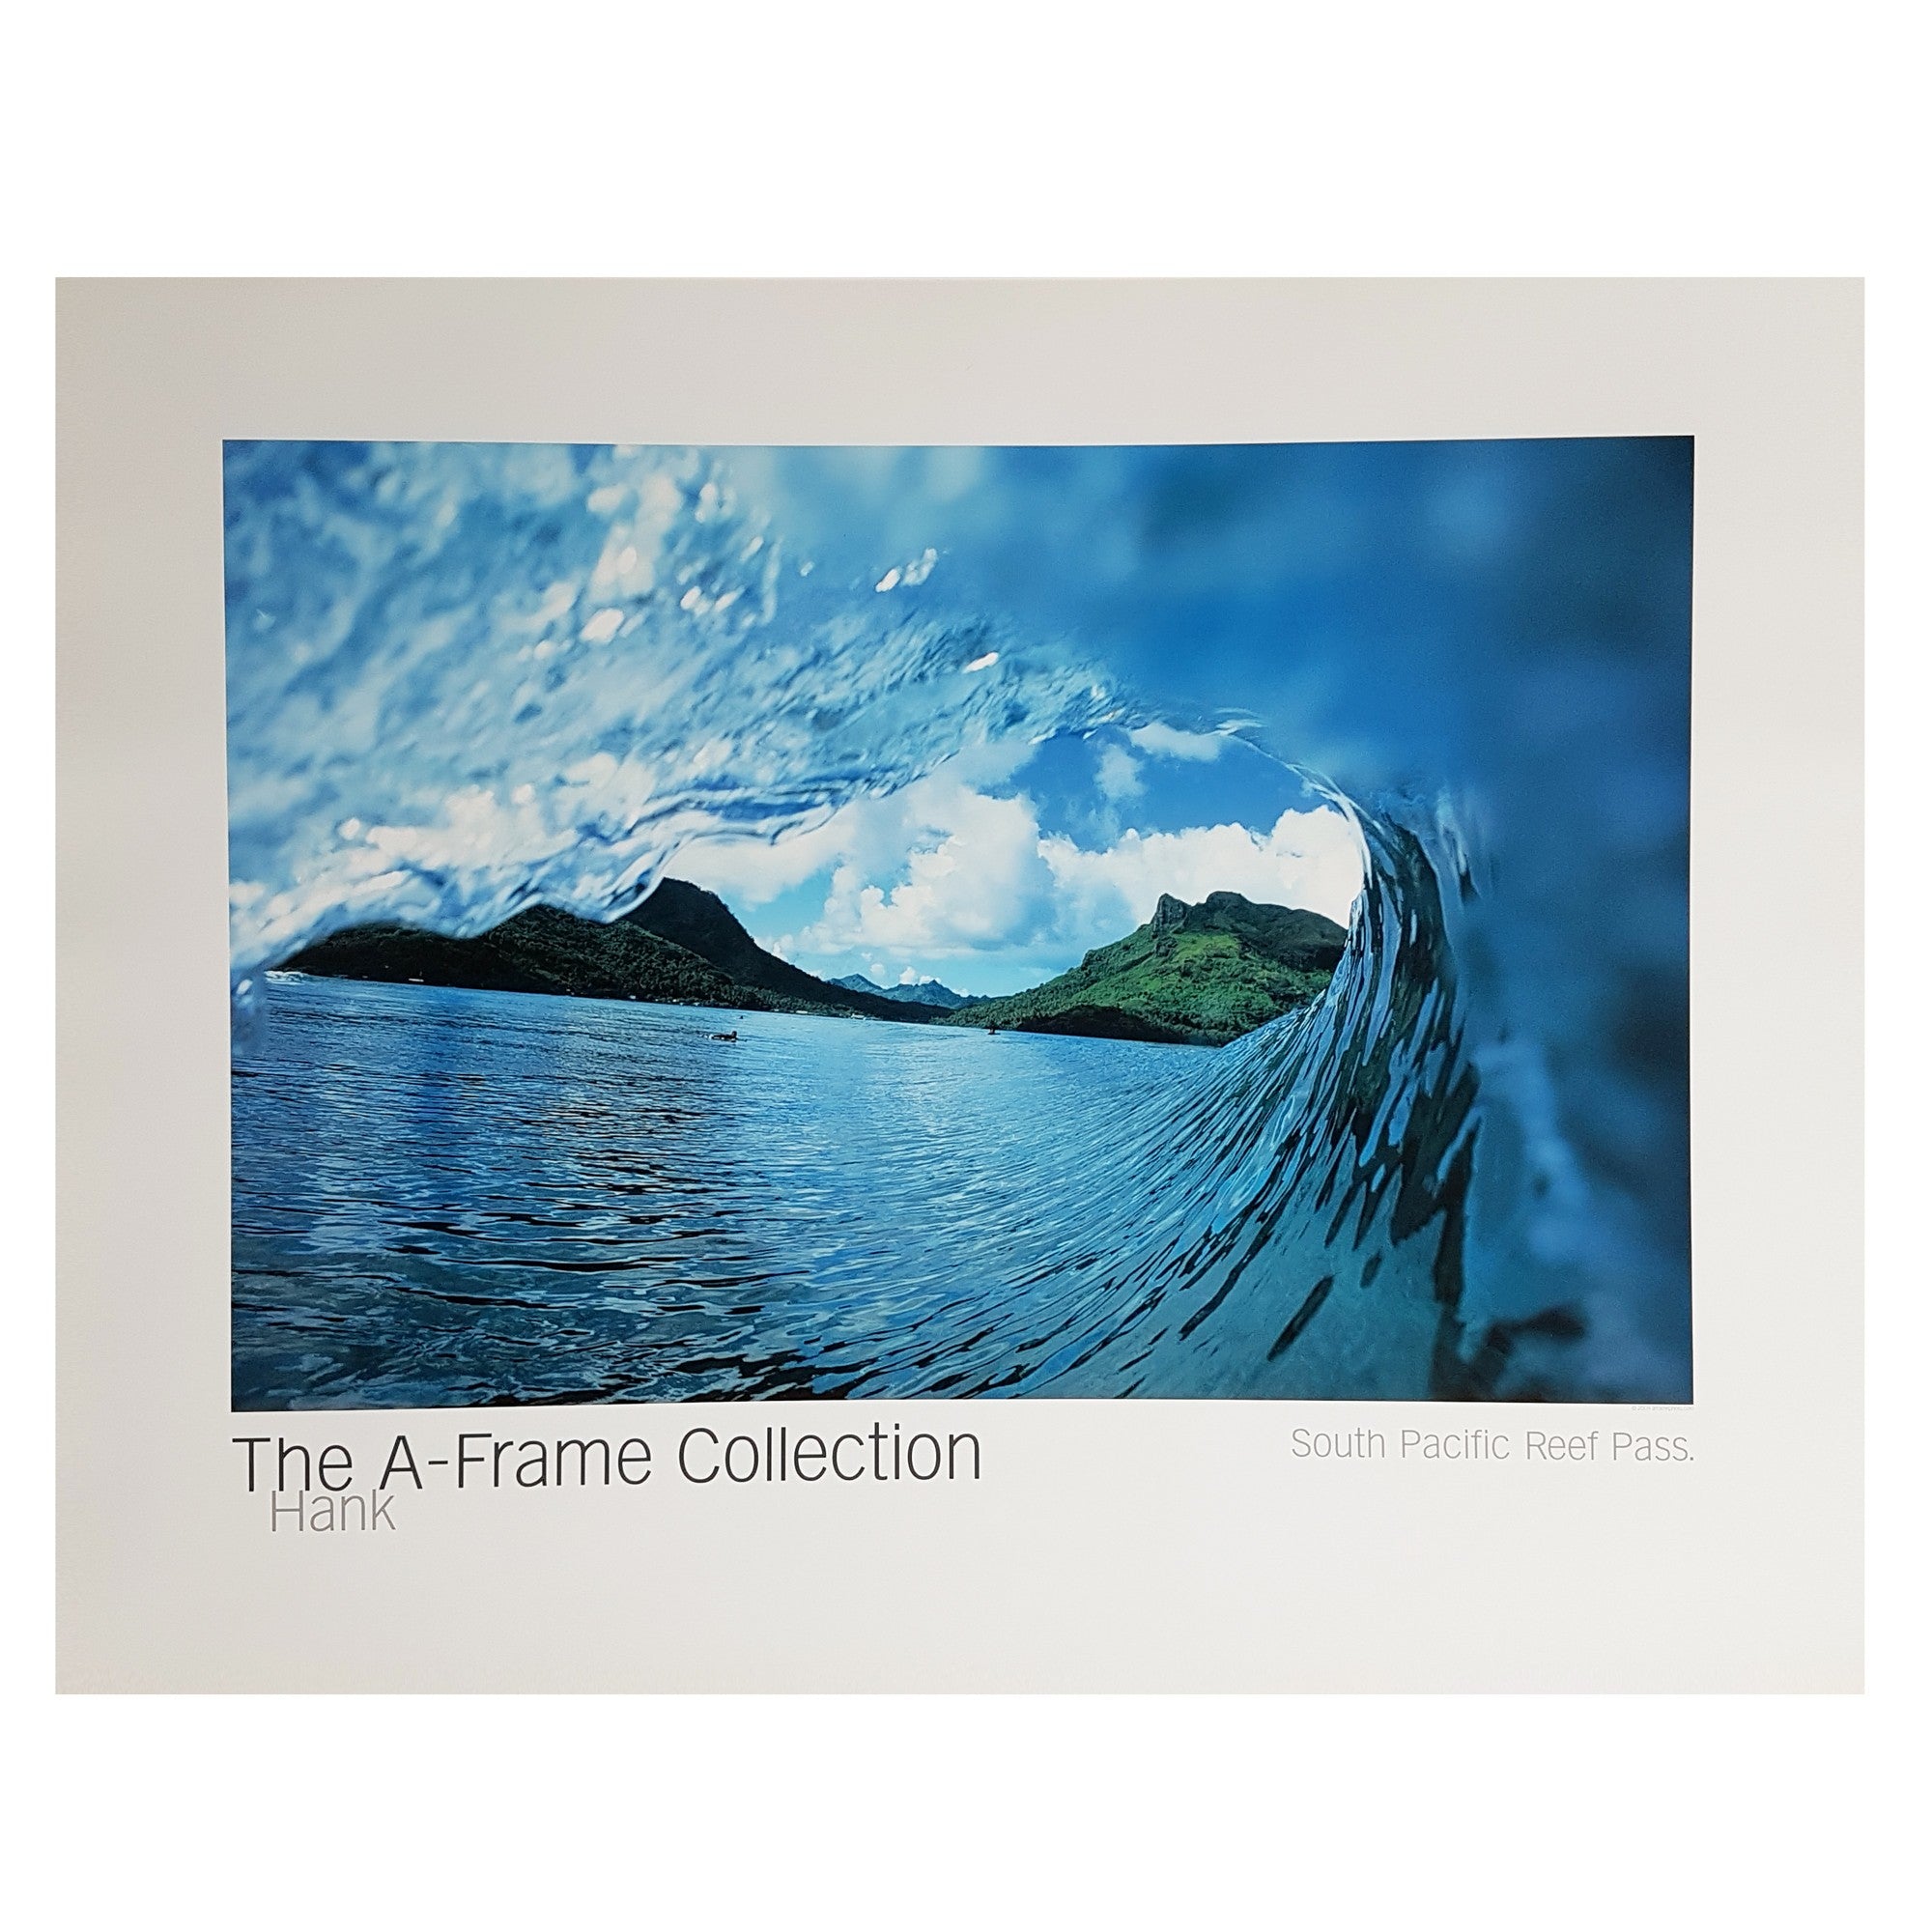 Poster Photo Surf A-FRAME COLLECTION Hank "South Pacific Reef Pass"